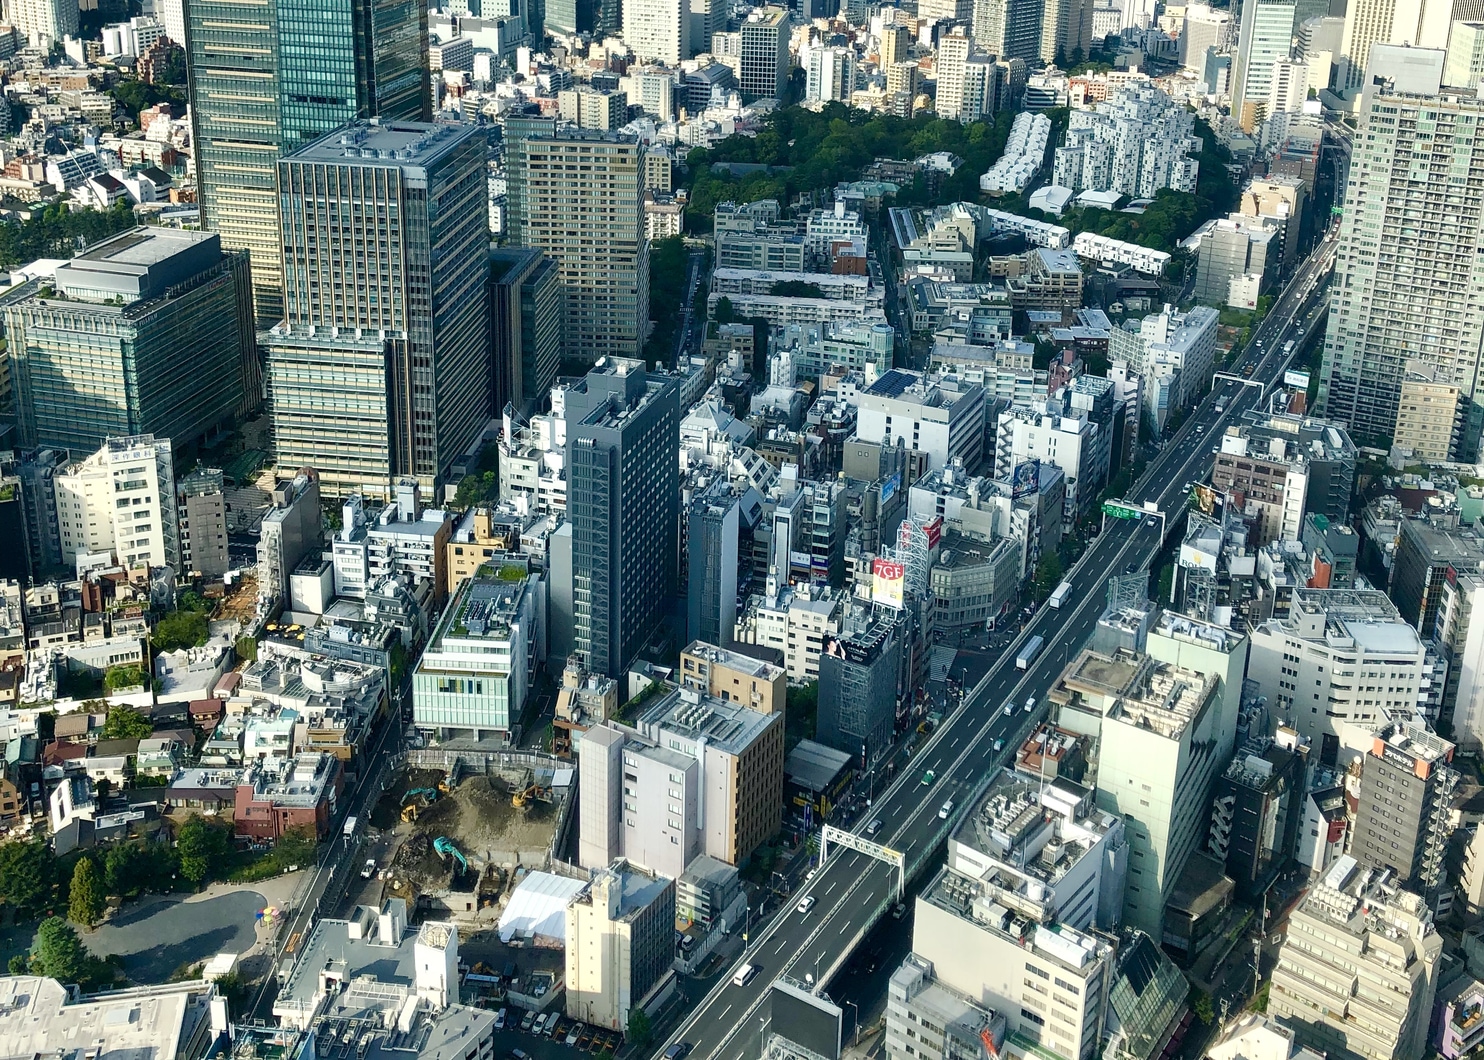 Google Street View Offers A Historical Look at Tokyo Station